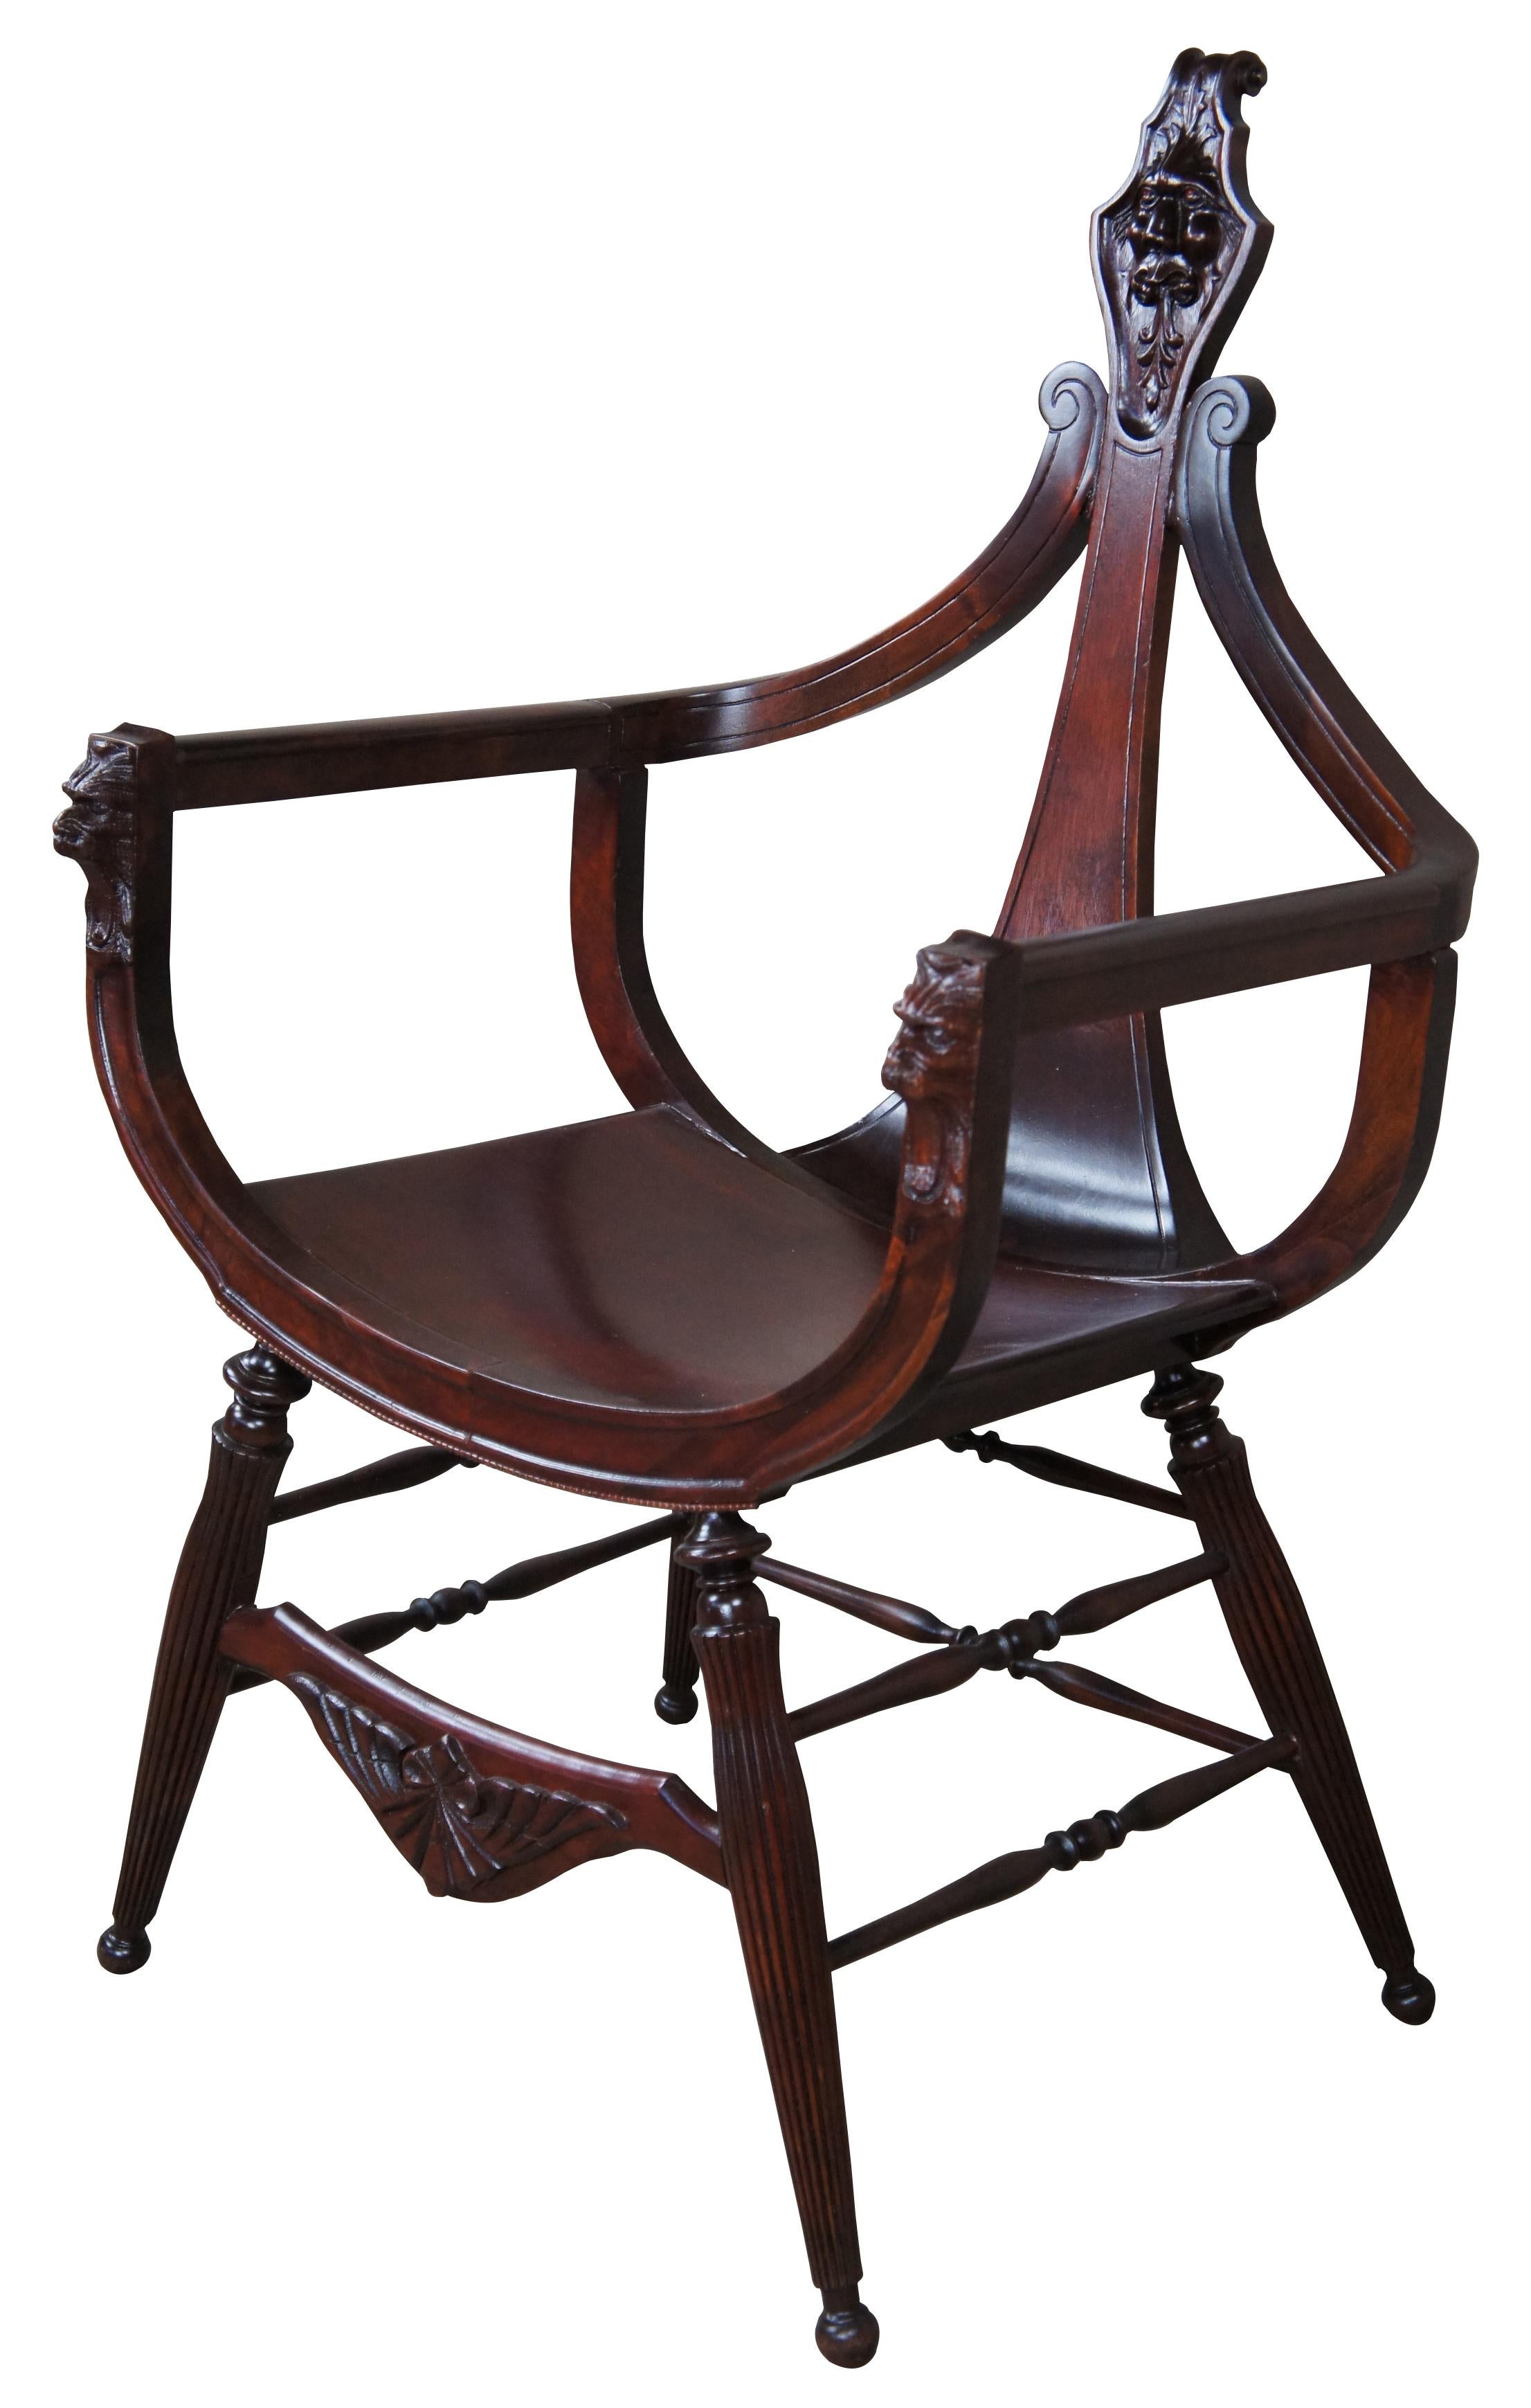 A late 19th century antique Victorian occasional arm chair. Made from mahogany with a curule or saddle seat form and lion head carvings. Features a cello neck back tapering to a scrolled crest. The seat is supported by turned reeded legs. 
 